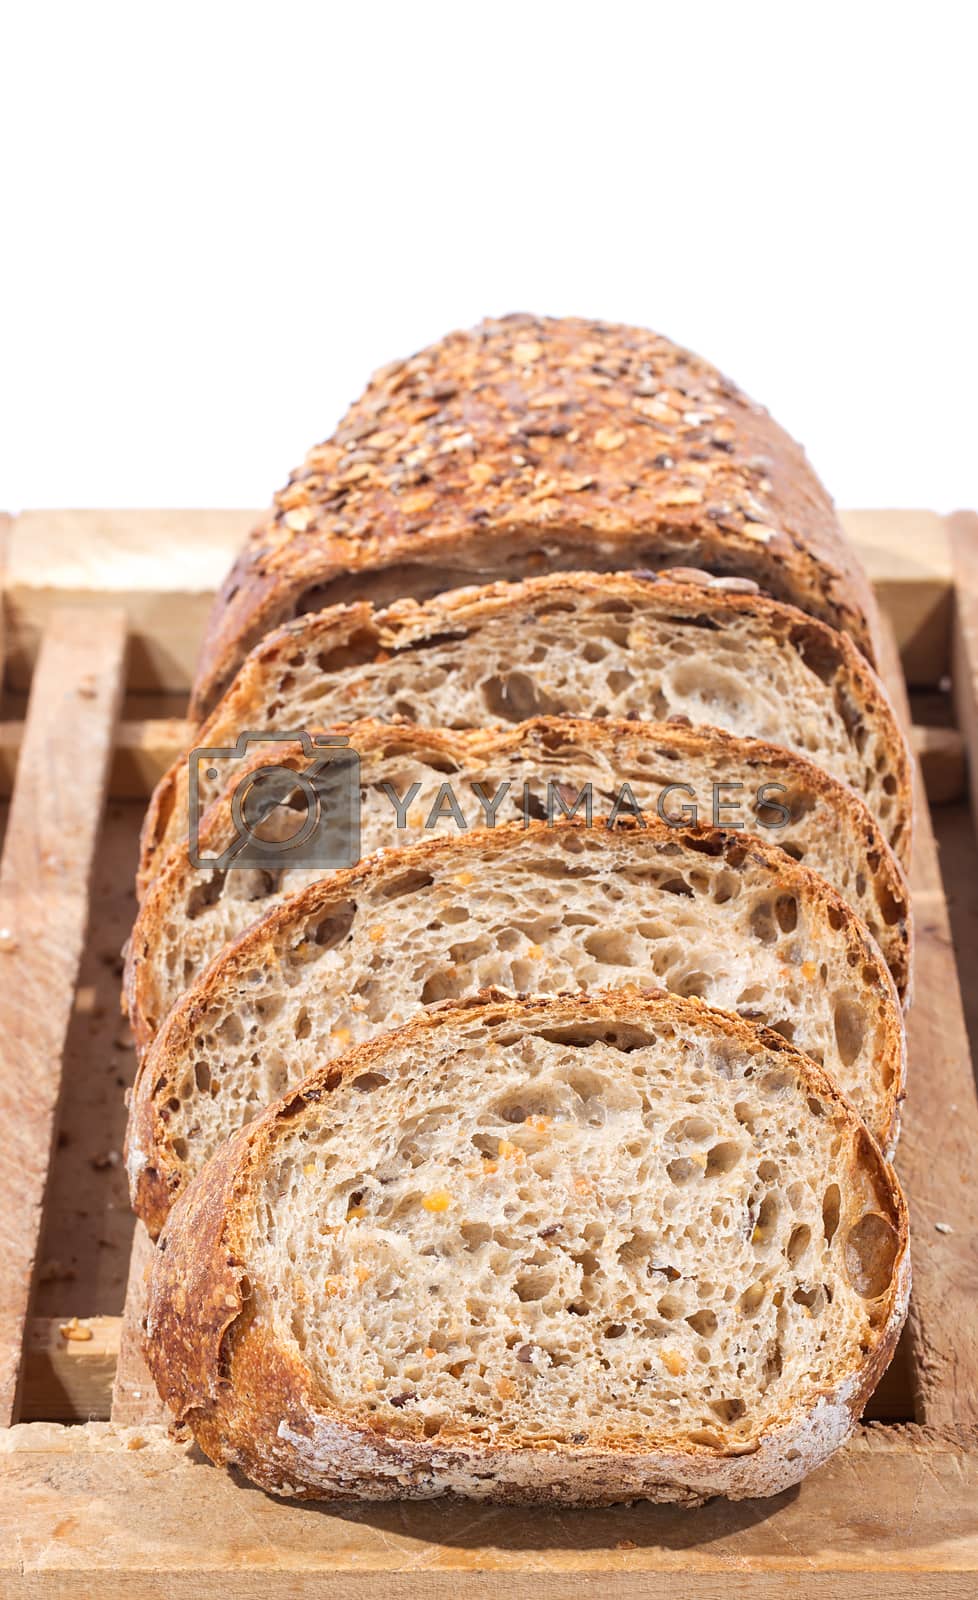 Royalty free image of Sliced Whole Grain Bread by milinz